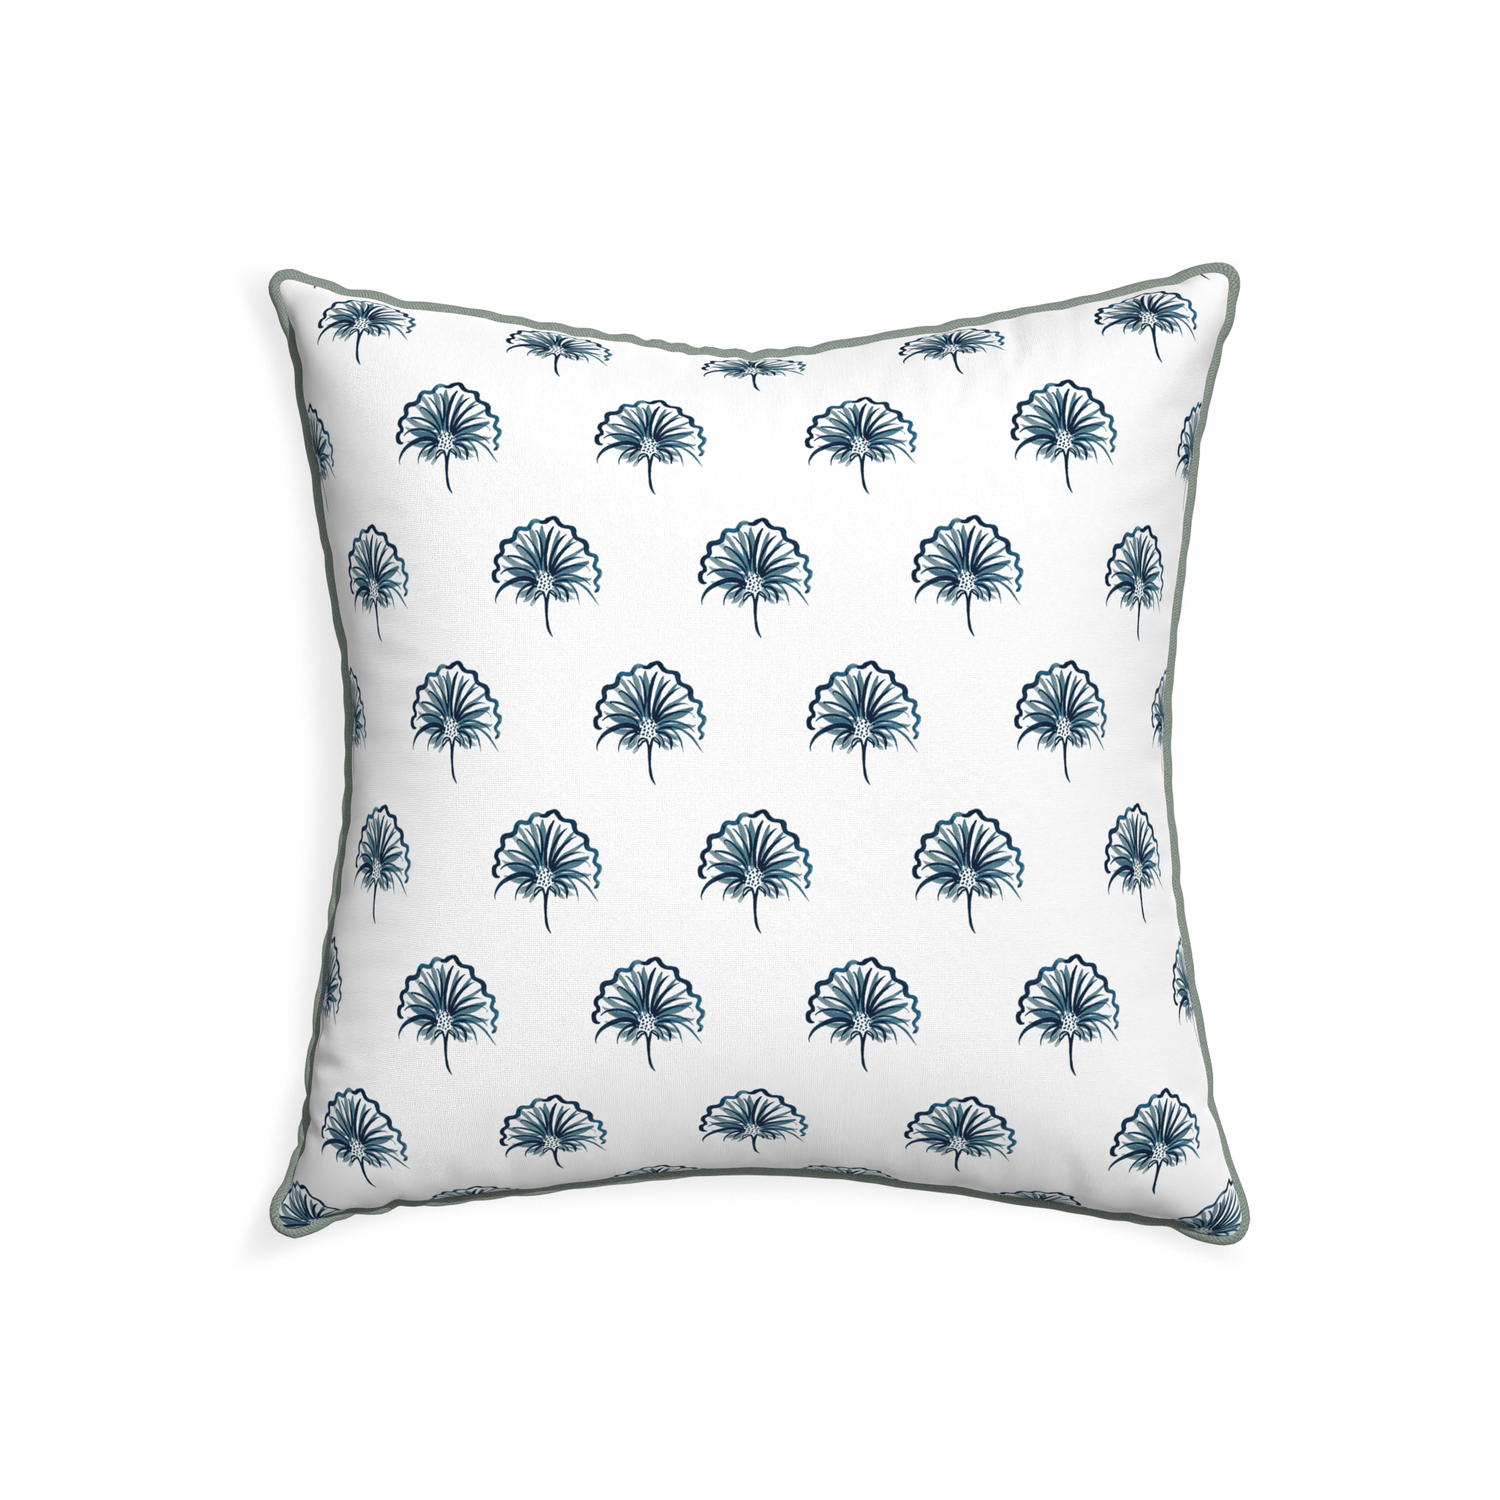 22-square penelope midnight custom floral navypillow with sage piping on white background